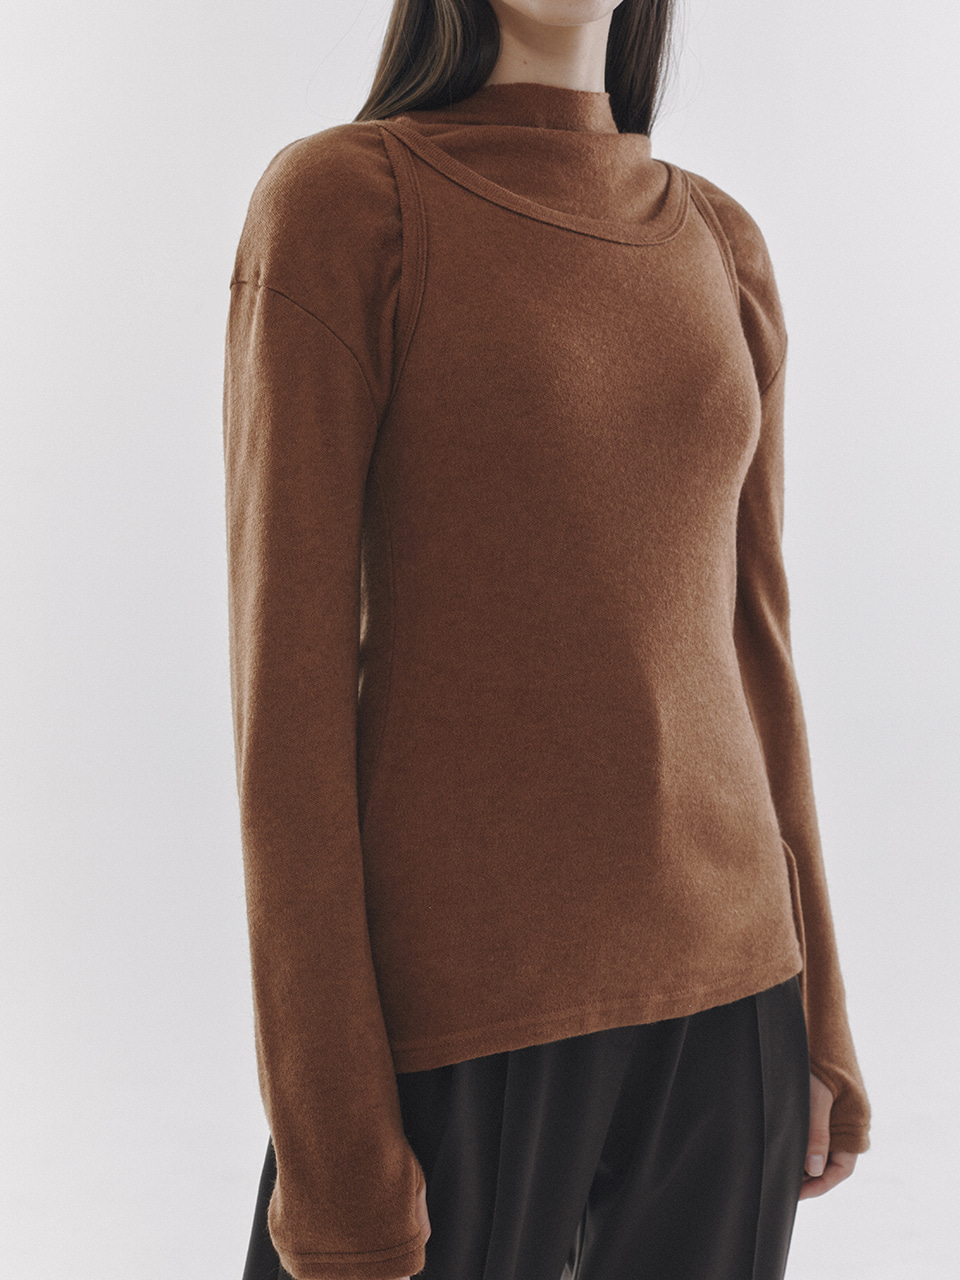 2Way Knitted Jersey Set Top Camel Brown